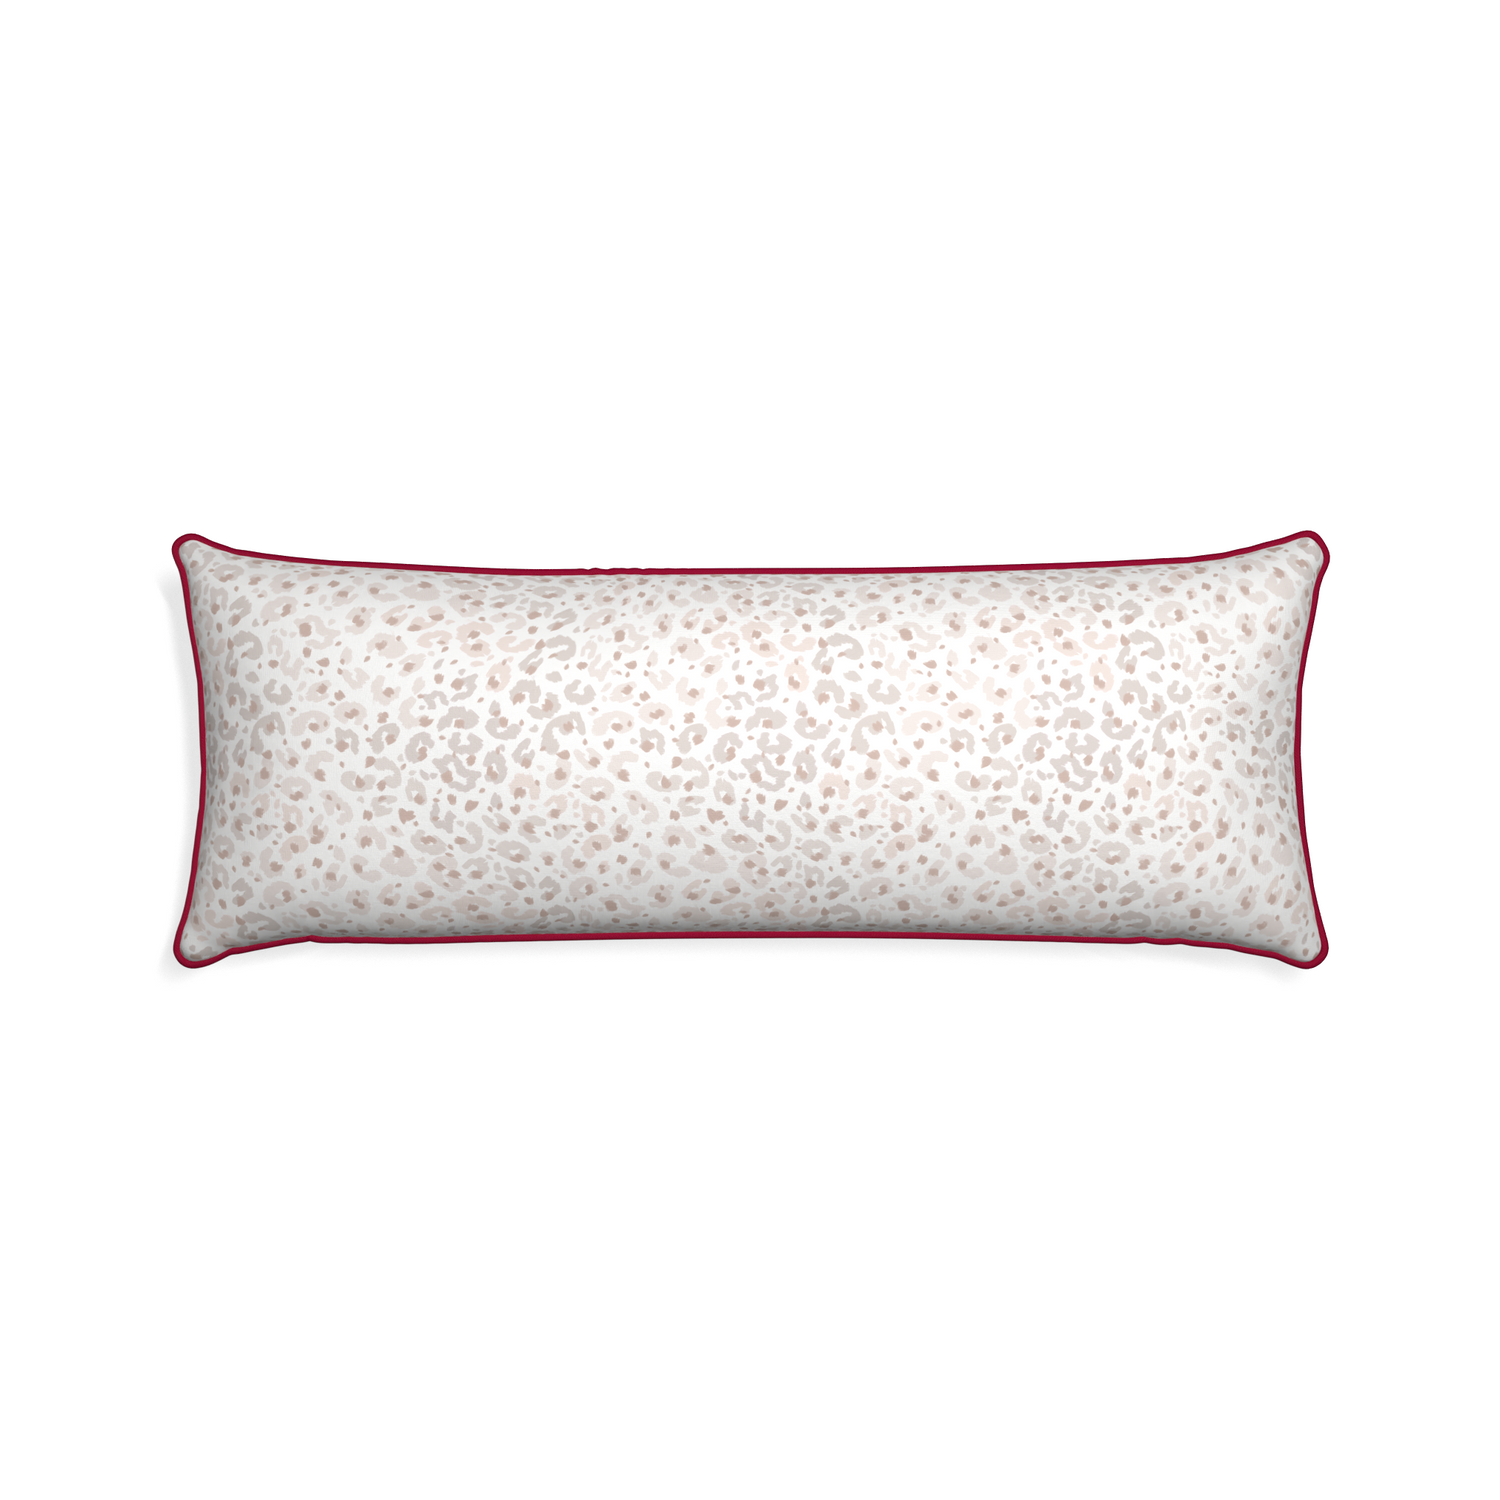 Xl-lumbar rosie custom beige animal printpillow with raspberry piping on white background